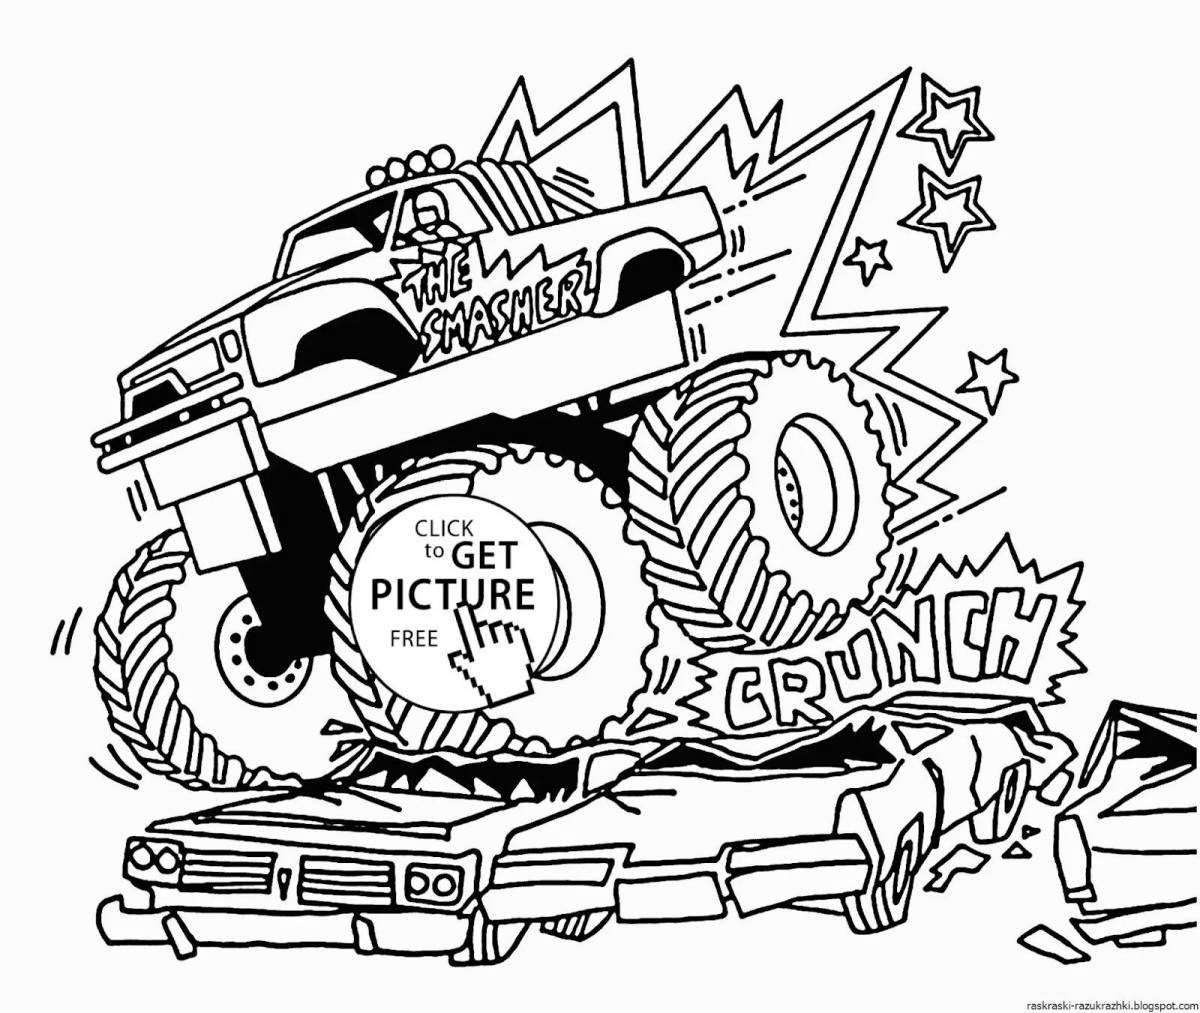 Fabulous racing jeep coloring page